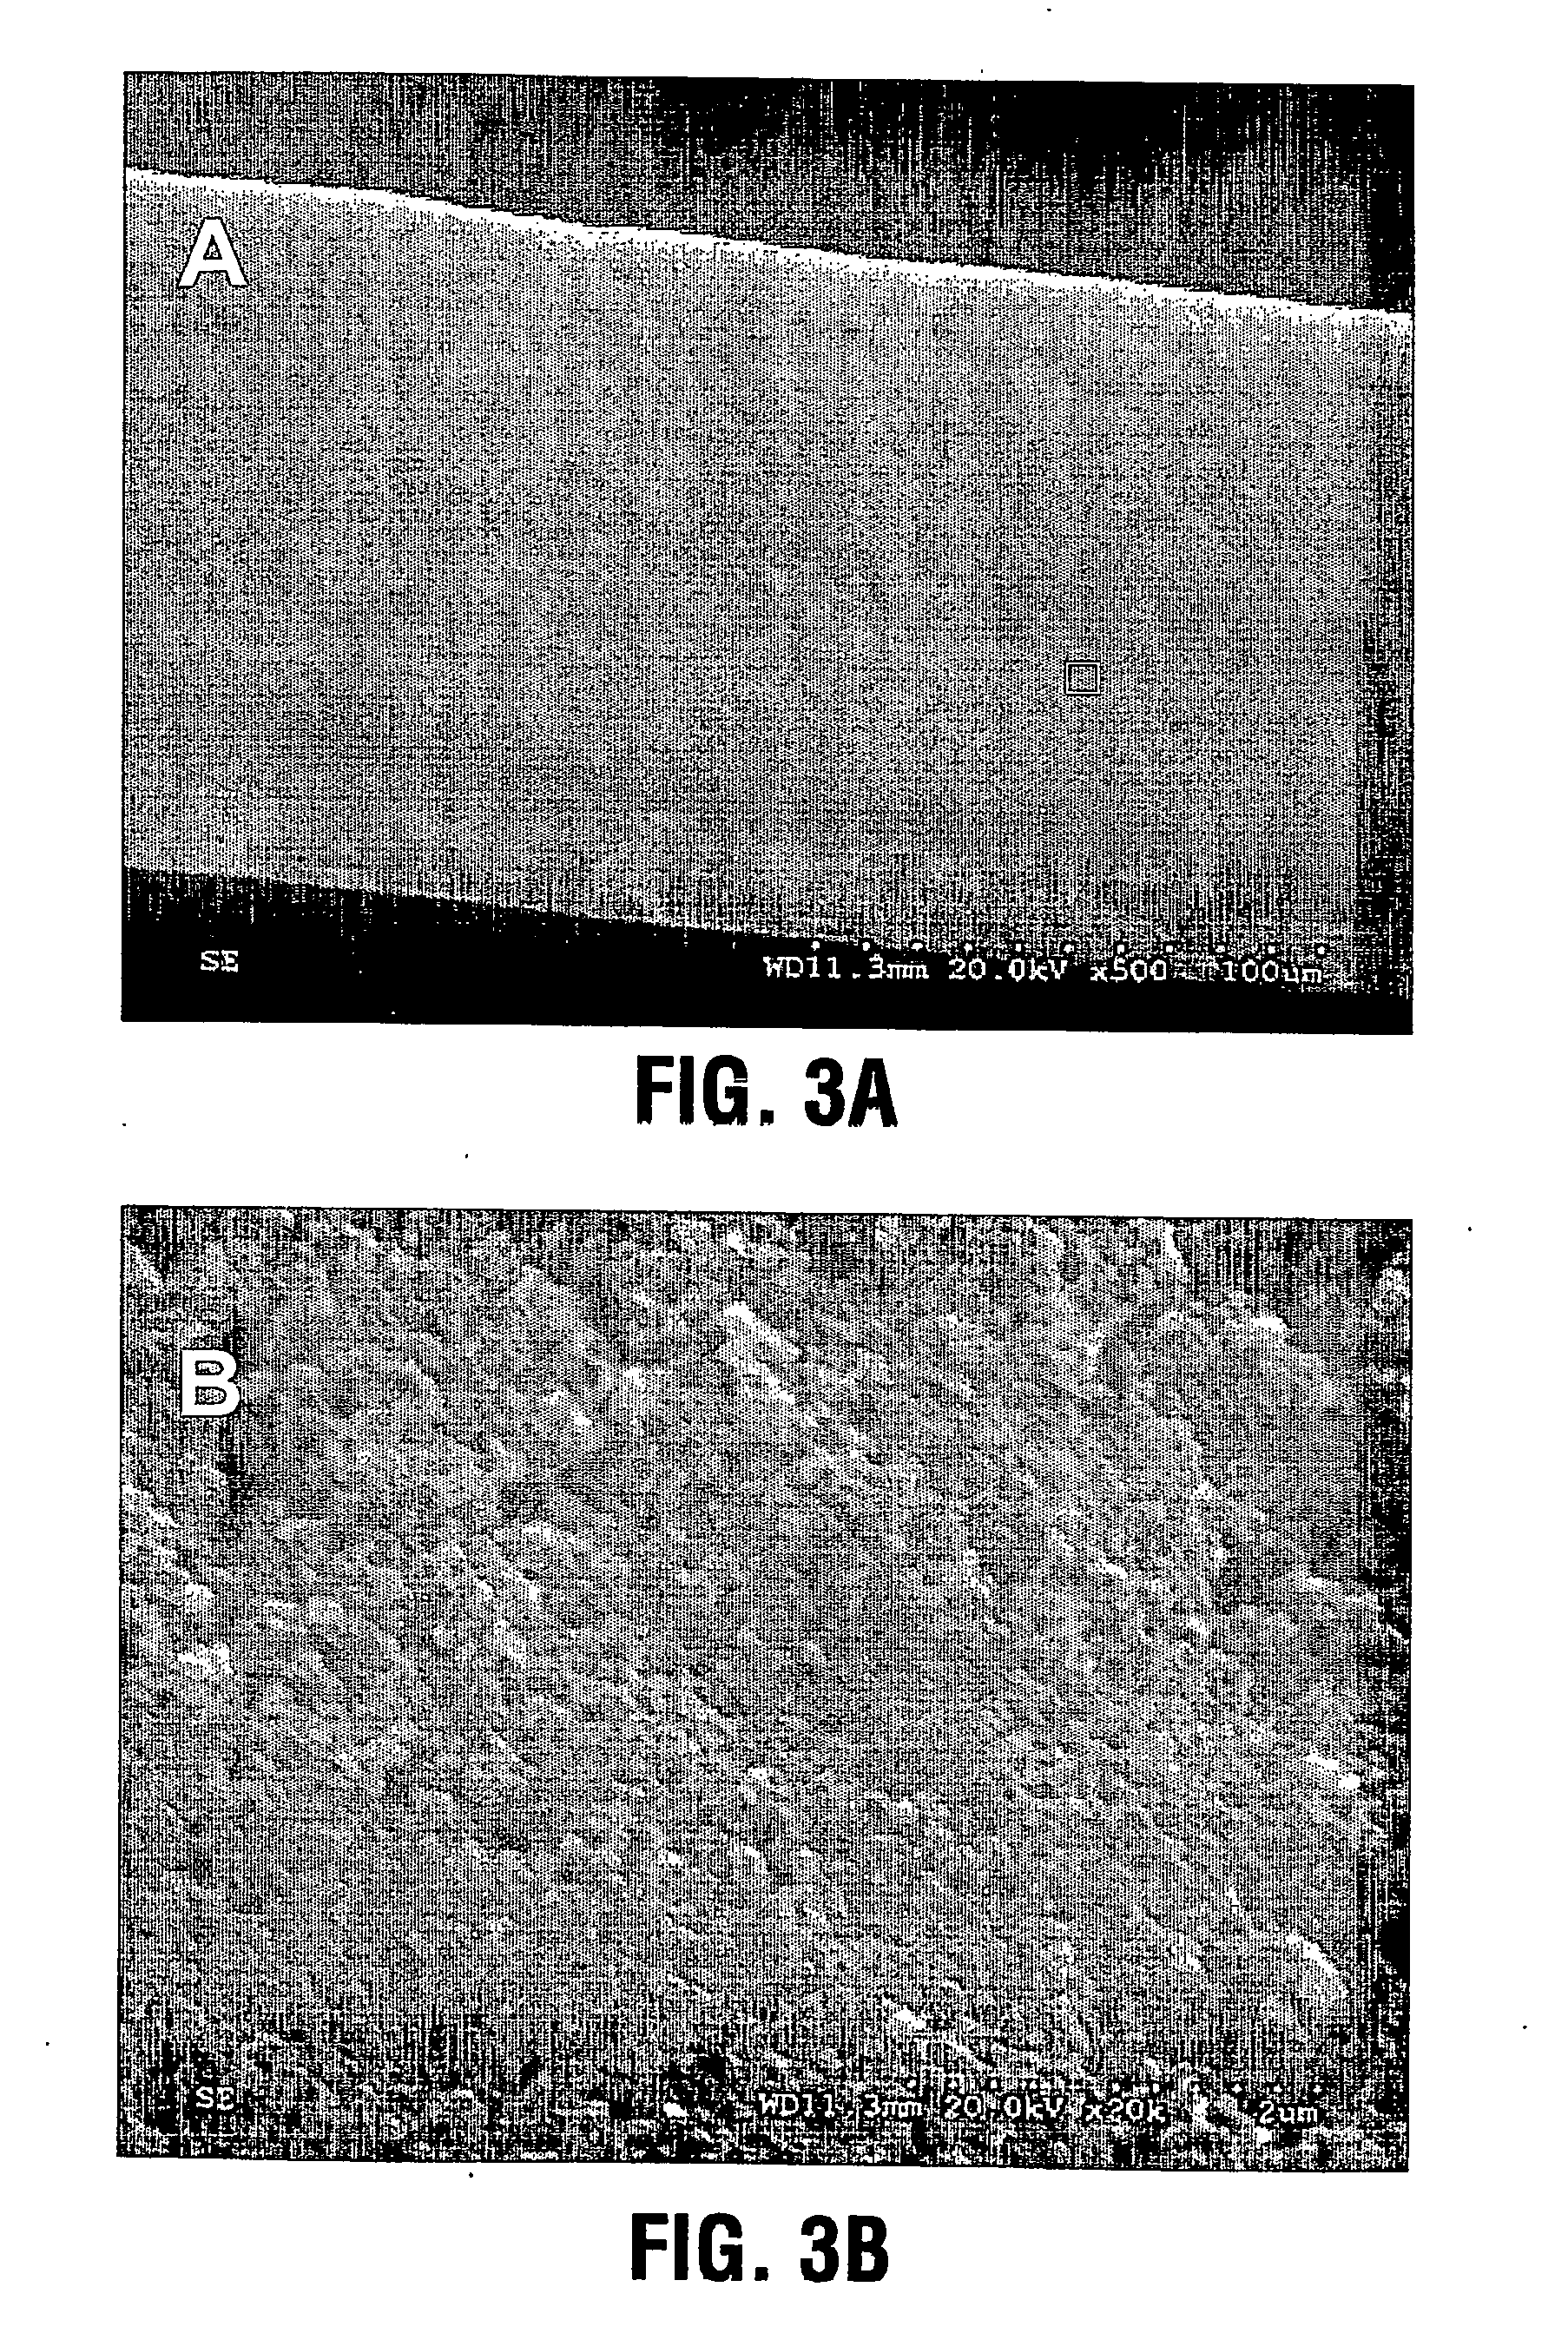 Calcium phosphate coated implantable medical devices and processes for making same